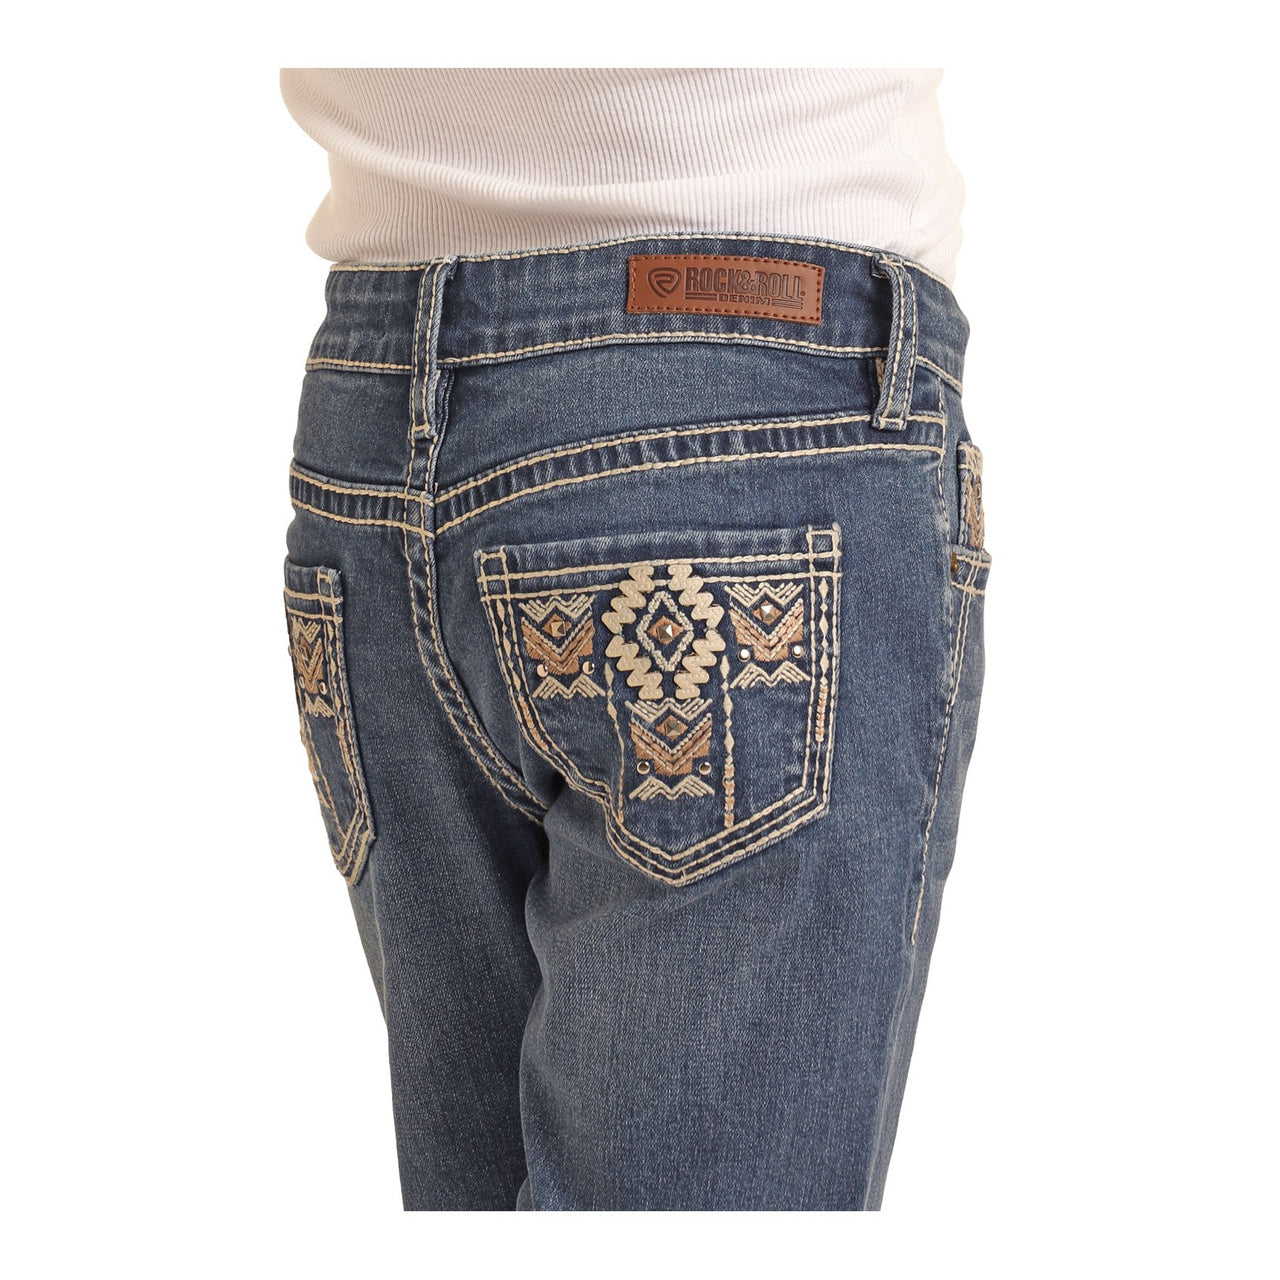 Rock & Roll Girl's Aztec Embroidered Bootcut Jeans - Med Wash